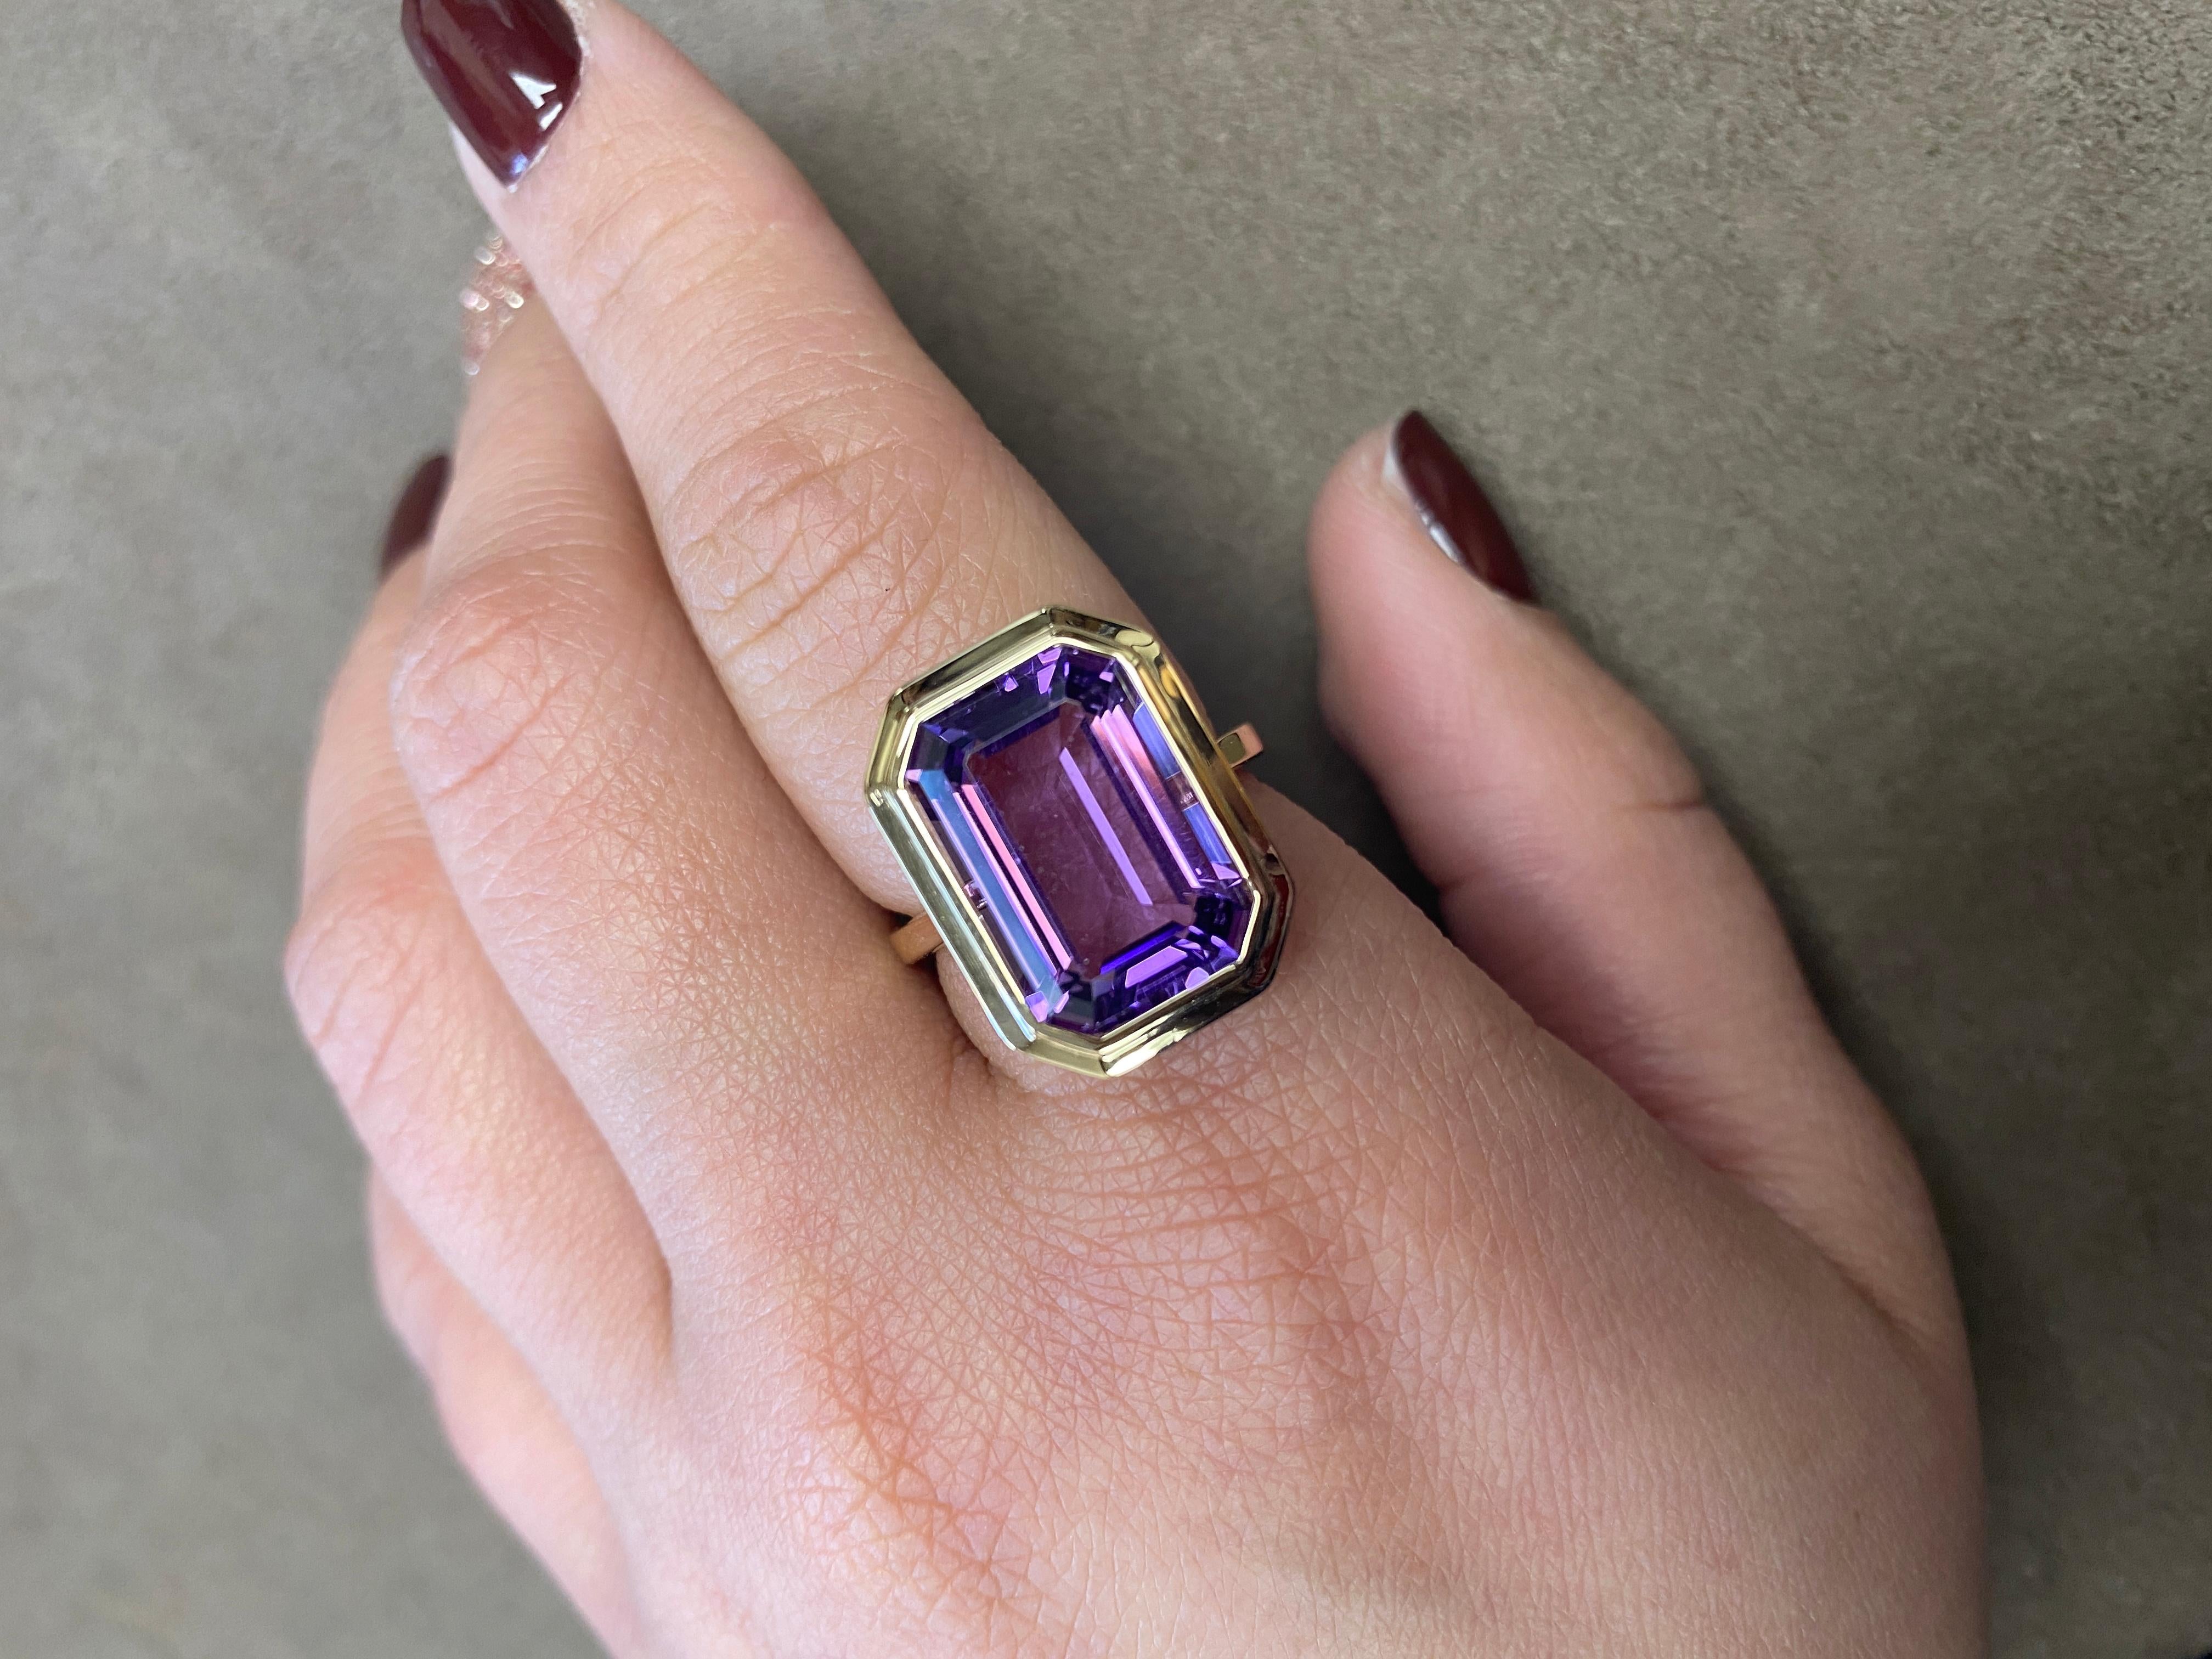 A classic yet an everyday bold statement piece, this amazing cocktail ring is part of our very new ‘Manhattan’ Collection. It has a 10 x 15 mm emerald cut Amethyst in a bezel setting in 18k gold   ​

Minimalist lines yet bold structures is what our